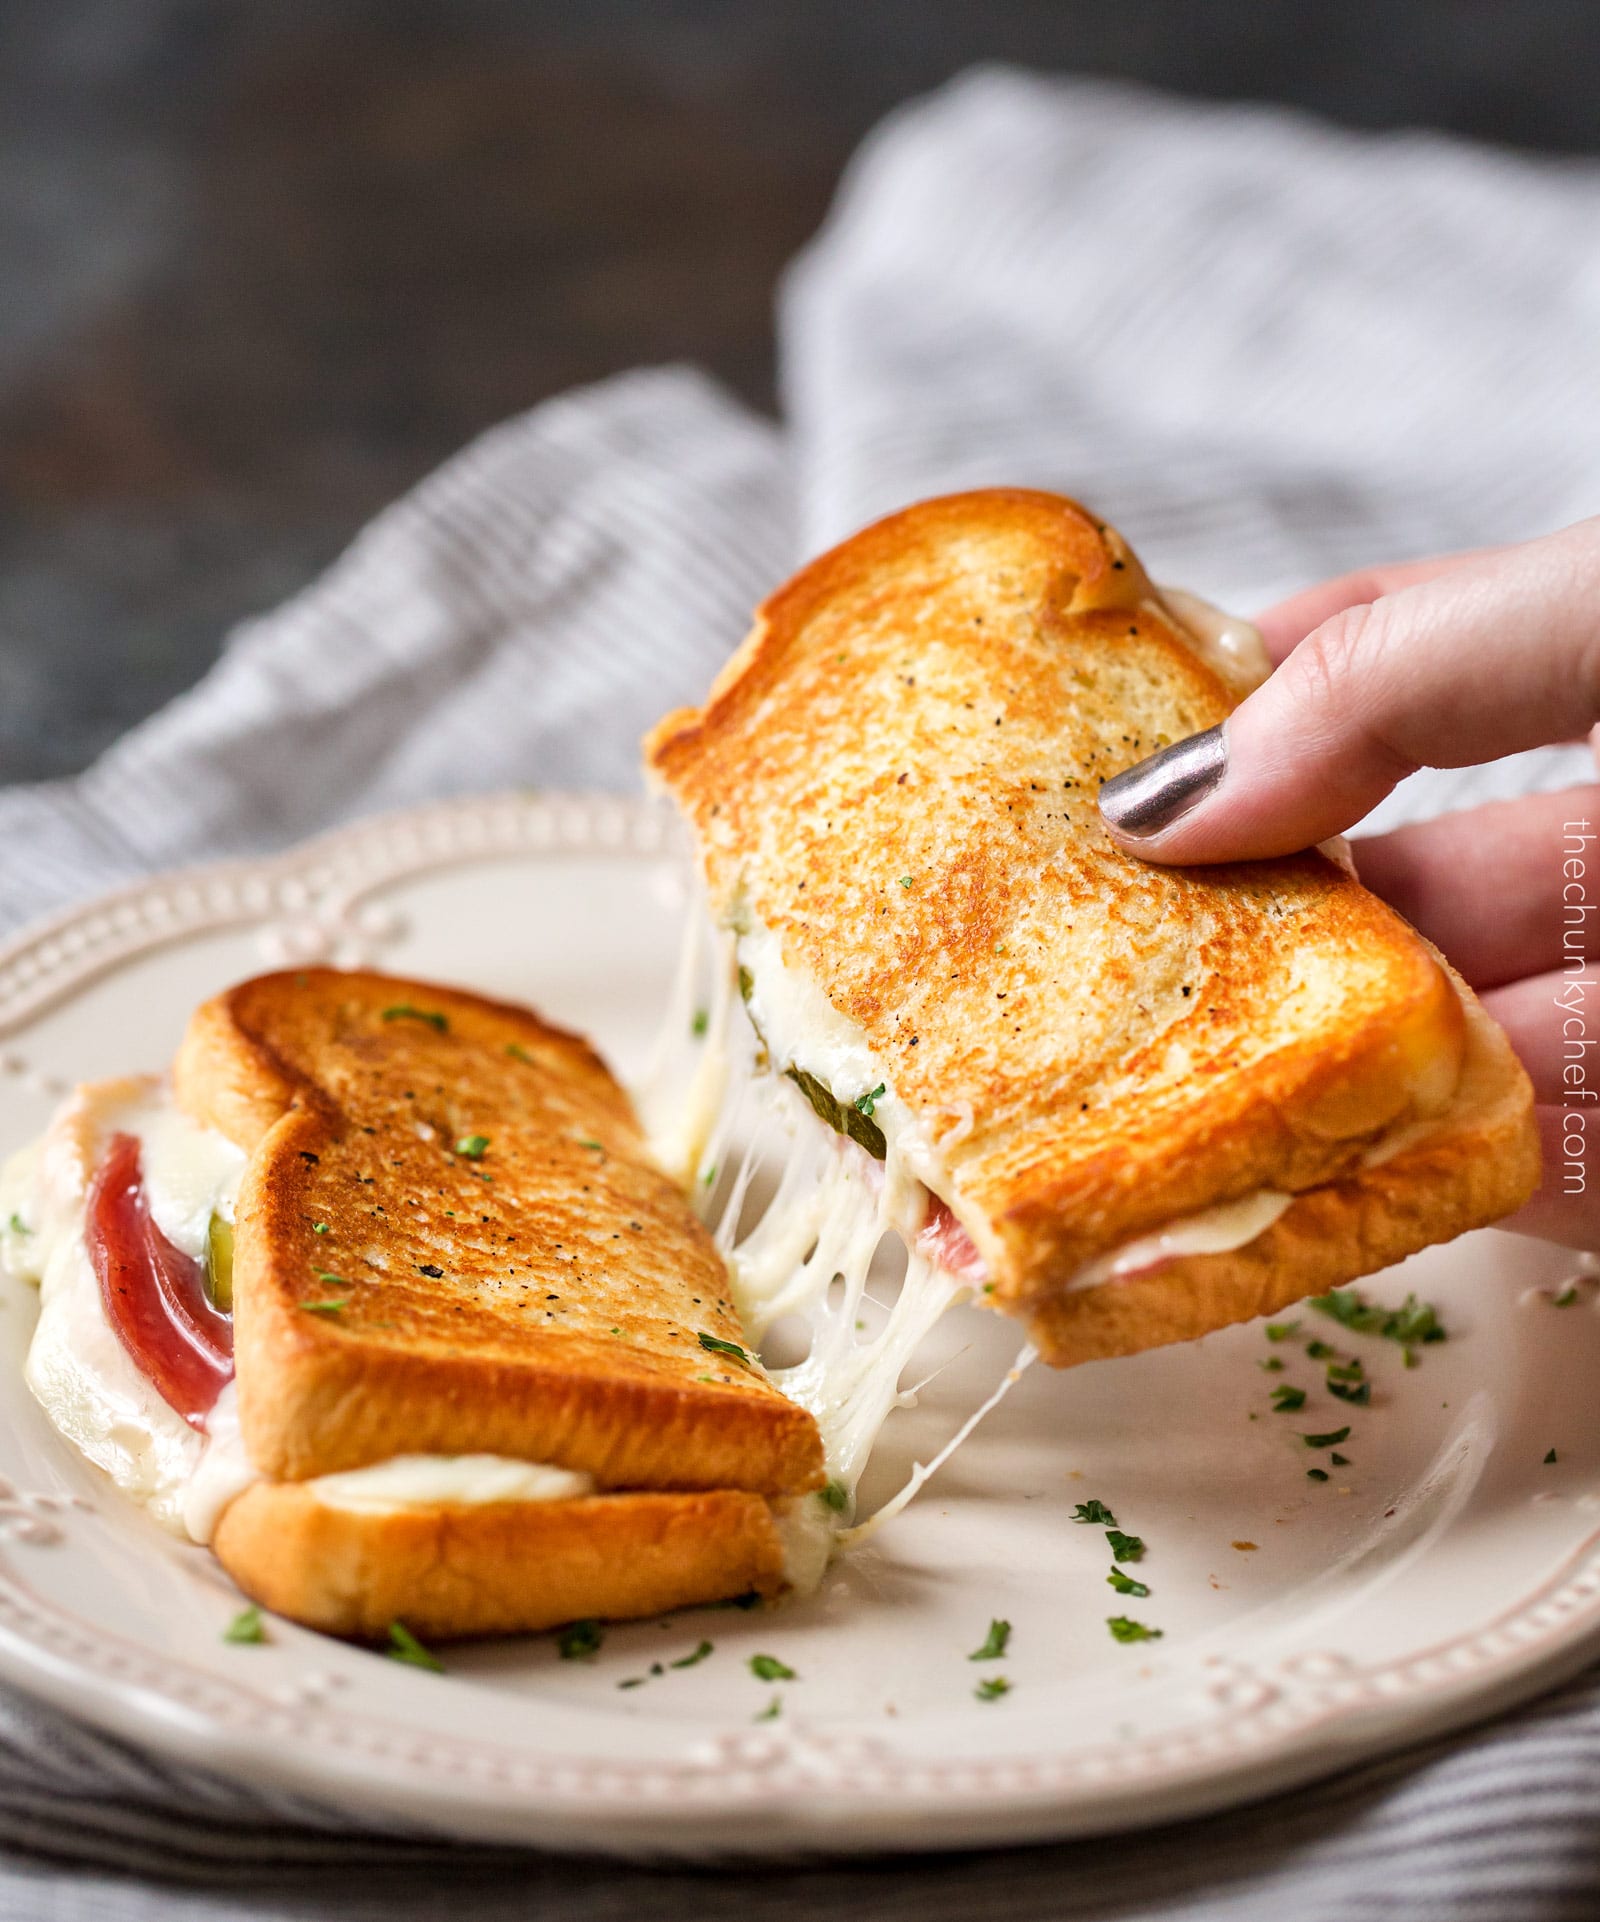 Salami and Pickle Grilled Cheese | Everything you love about the salami, cream cheese and pickle appetizer, put into a gooey, buttery grilled cheese! Comfort food elevated to gourmet levels! | http://thechunkychef.com